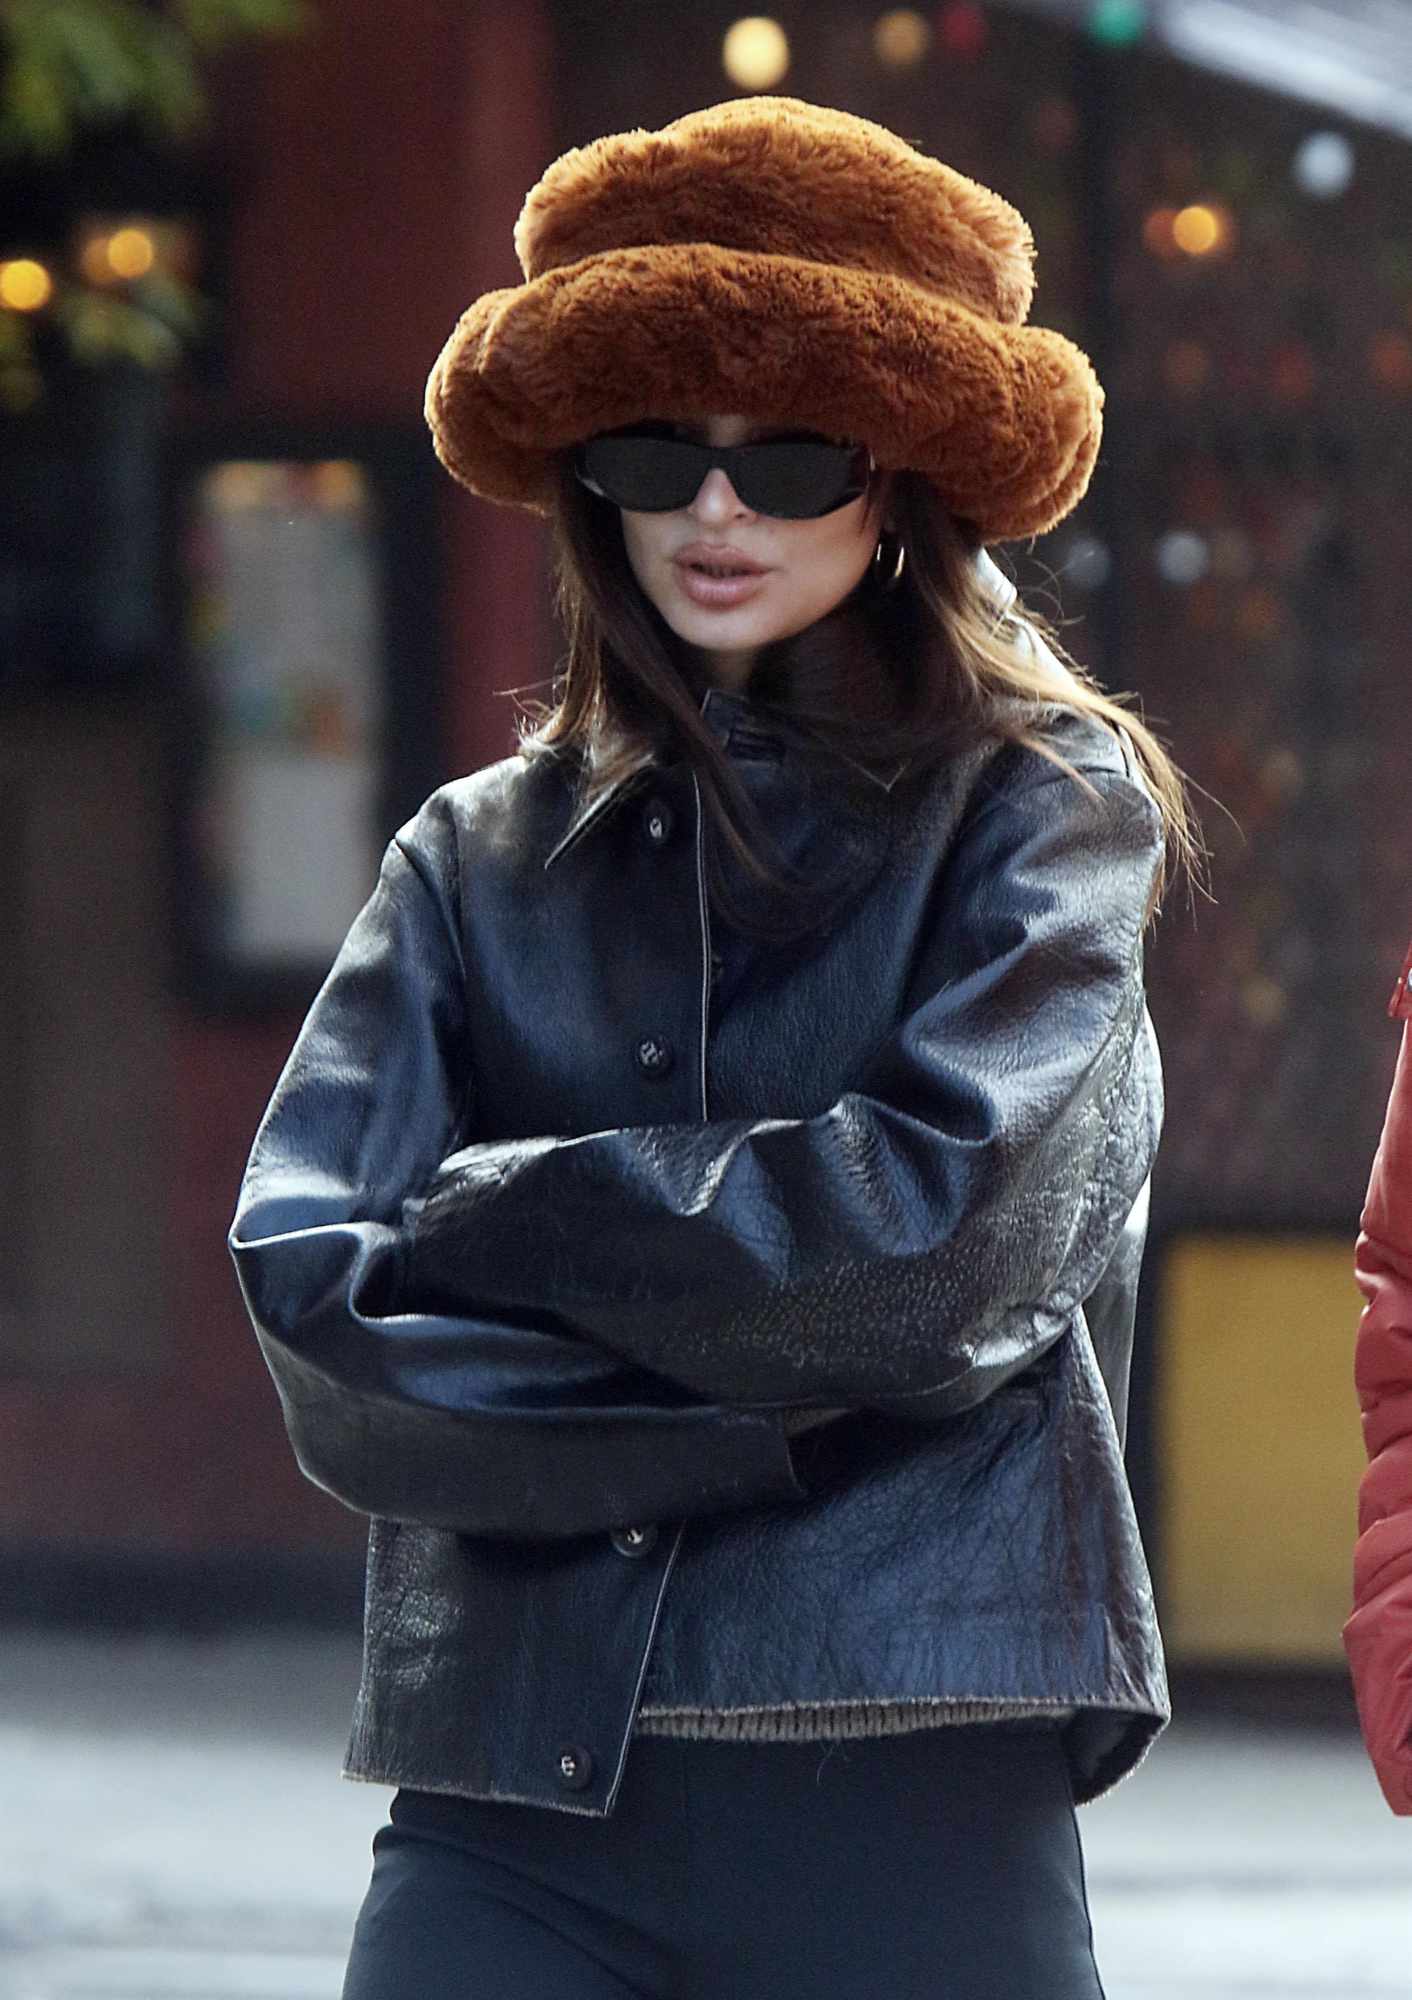 Emily Ratajkowsk's Giant Hat Is the First Sign of Winter